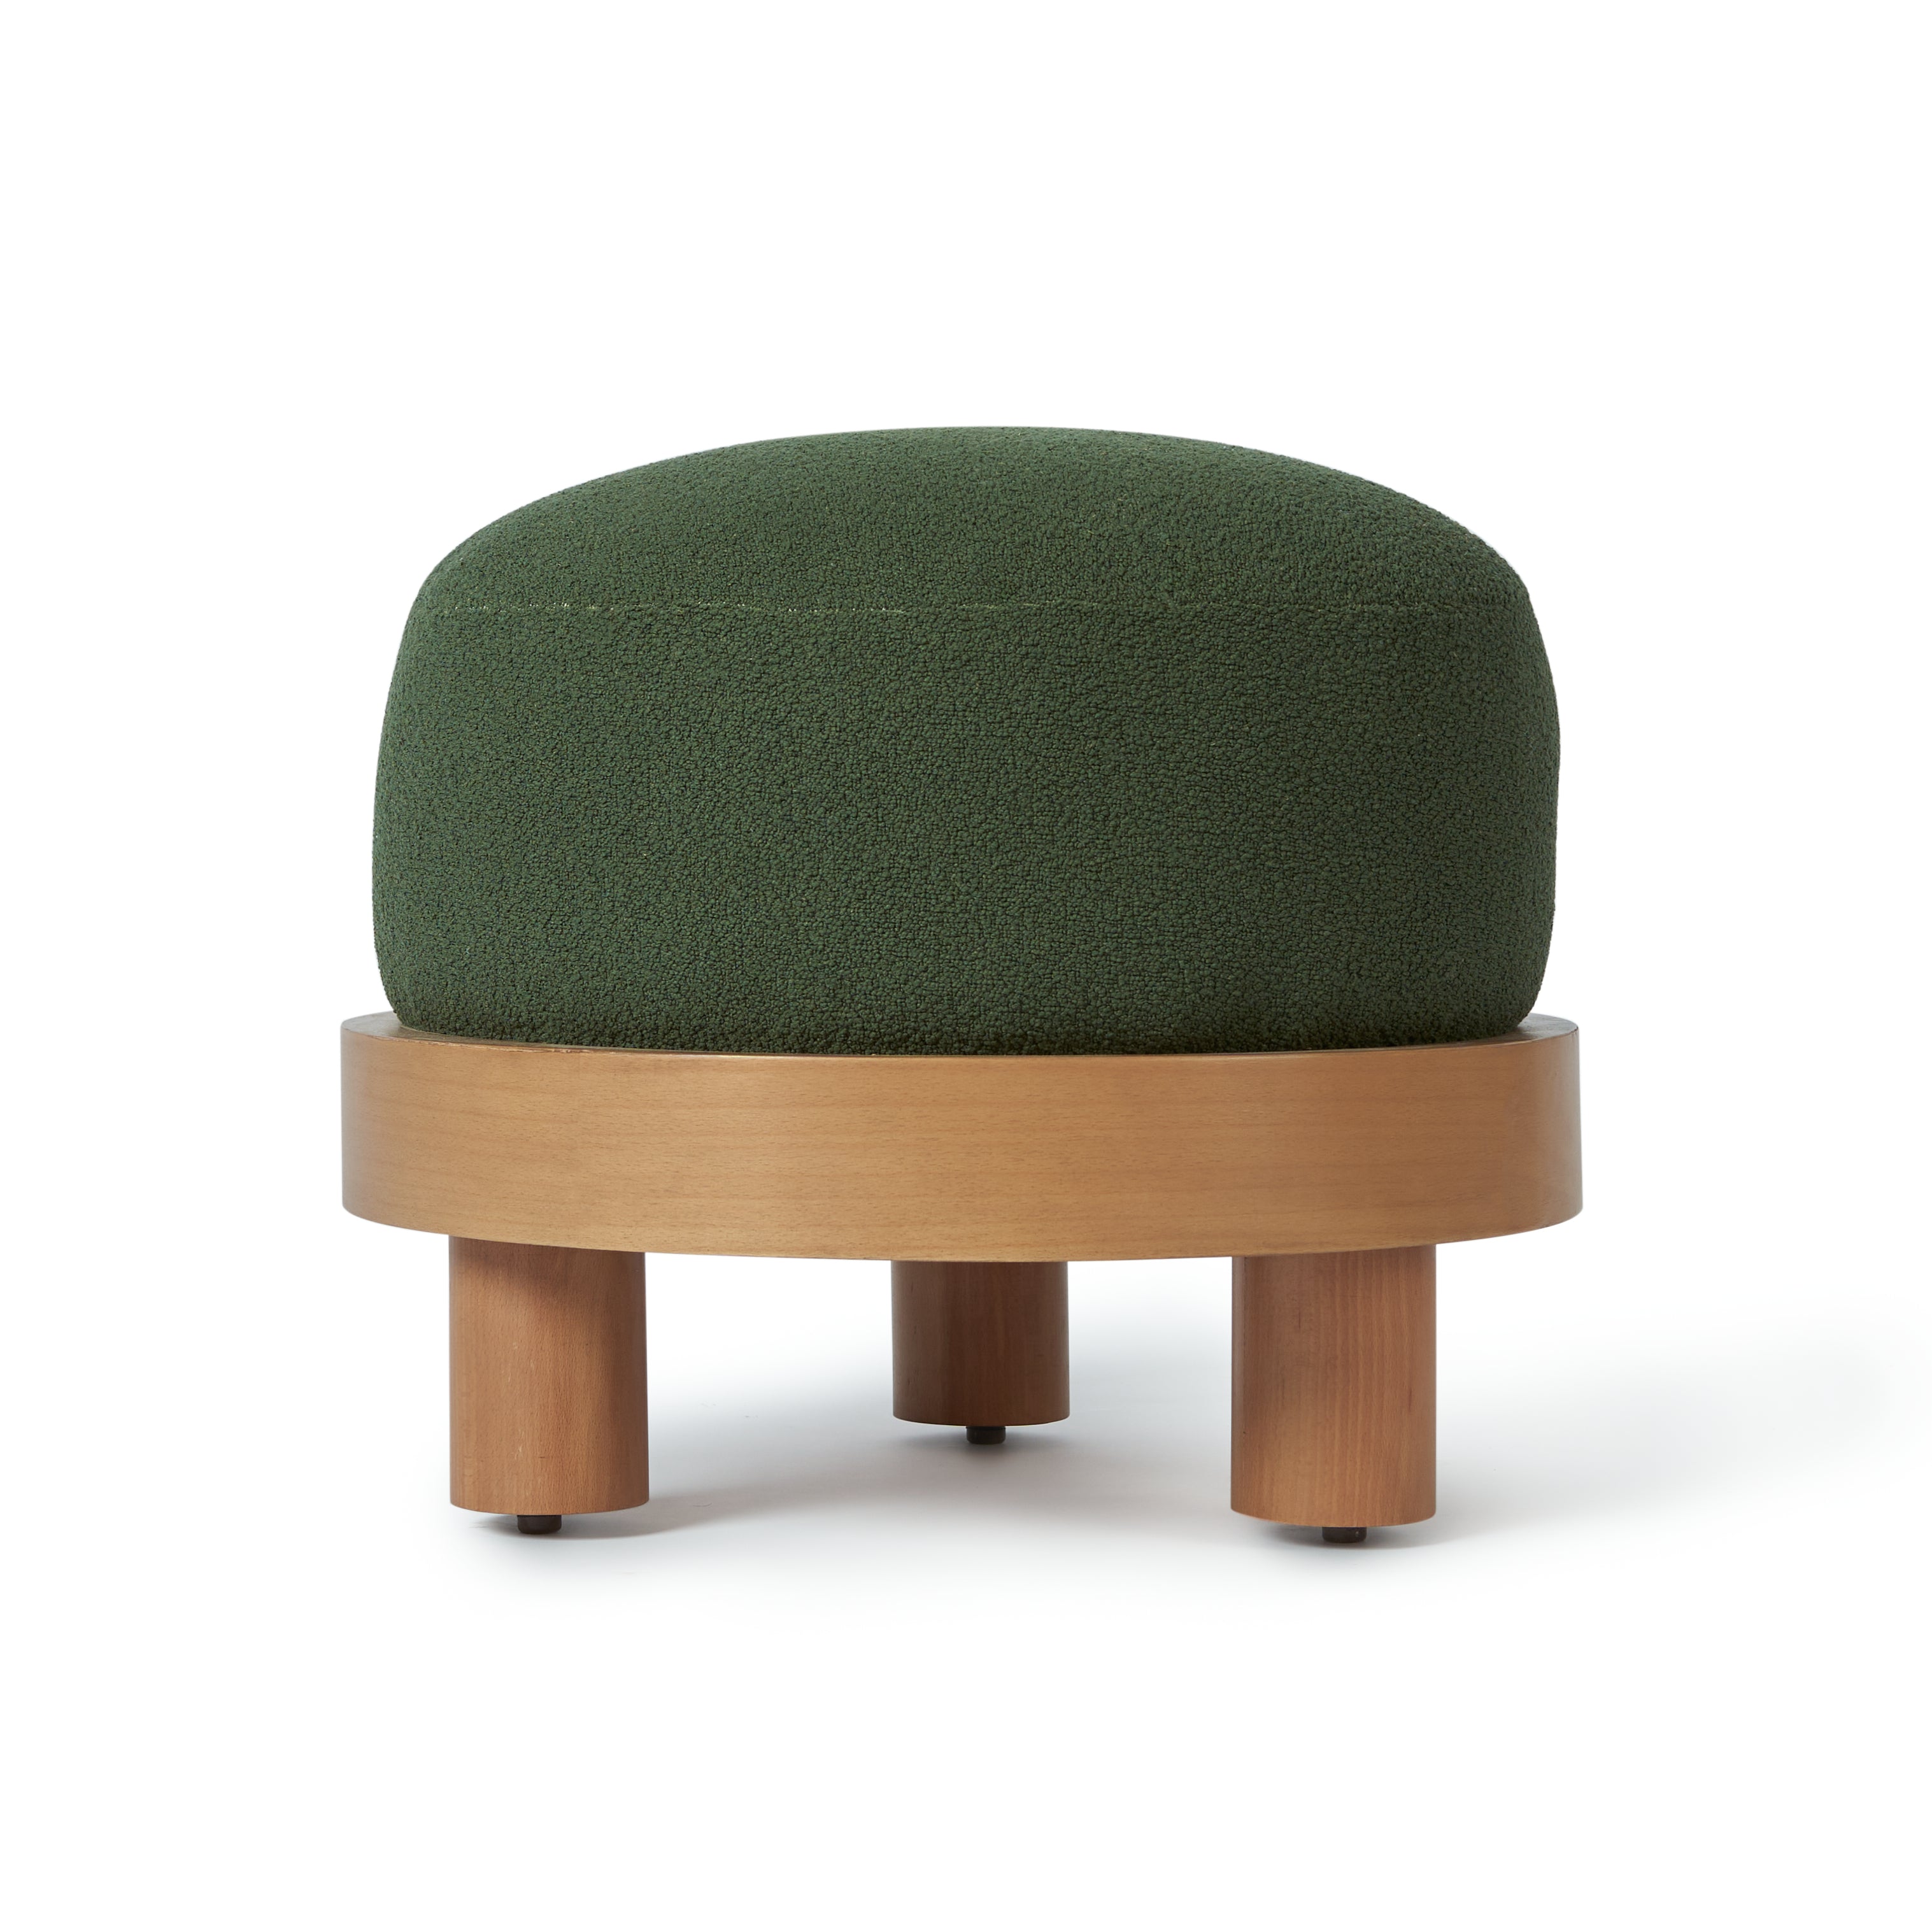 Poached Stool - Sage Green